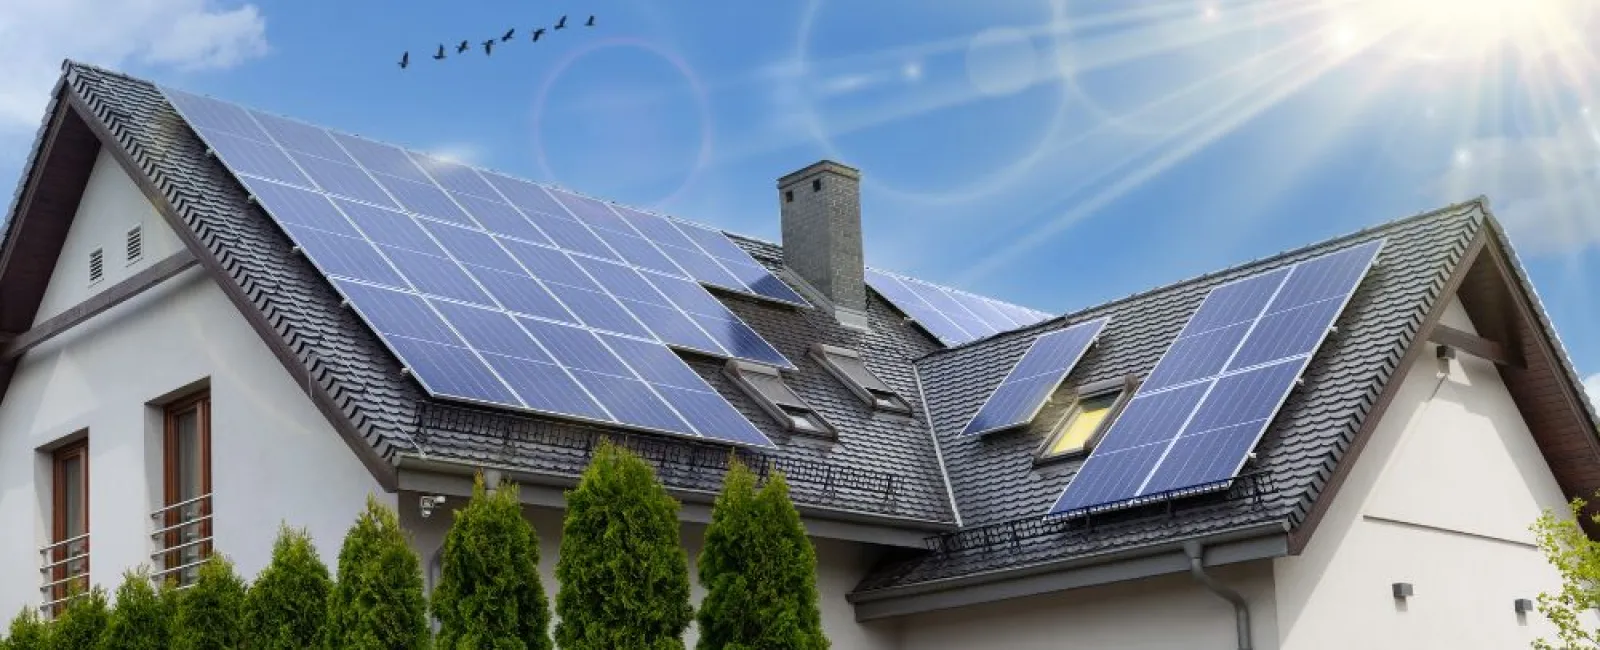 4 Misconceptions About Adding Solar Panels to Your Home